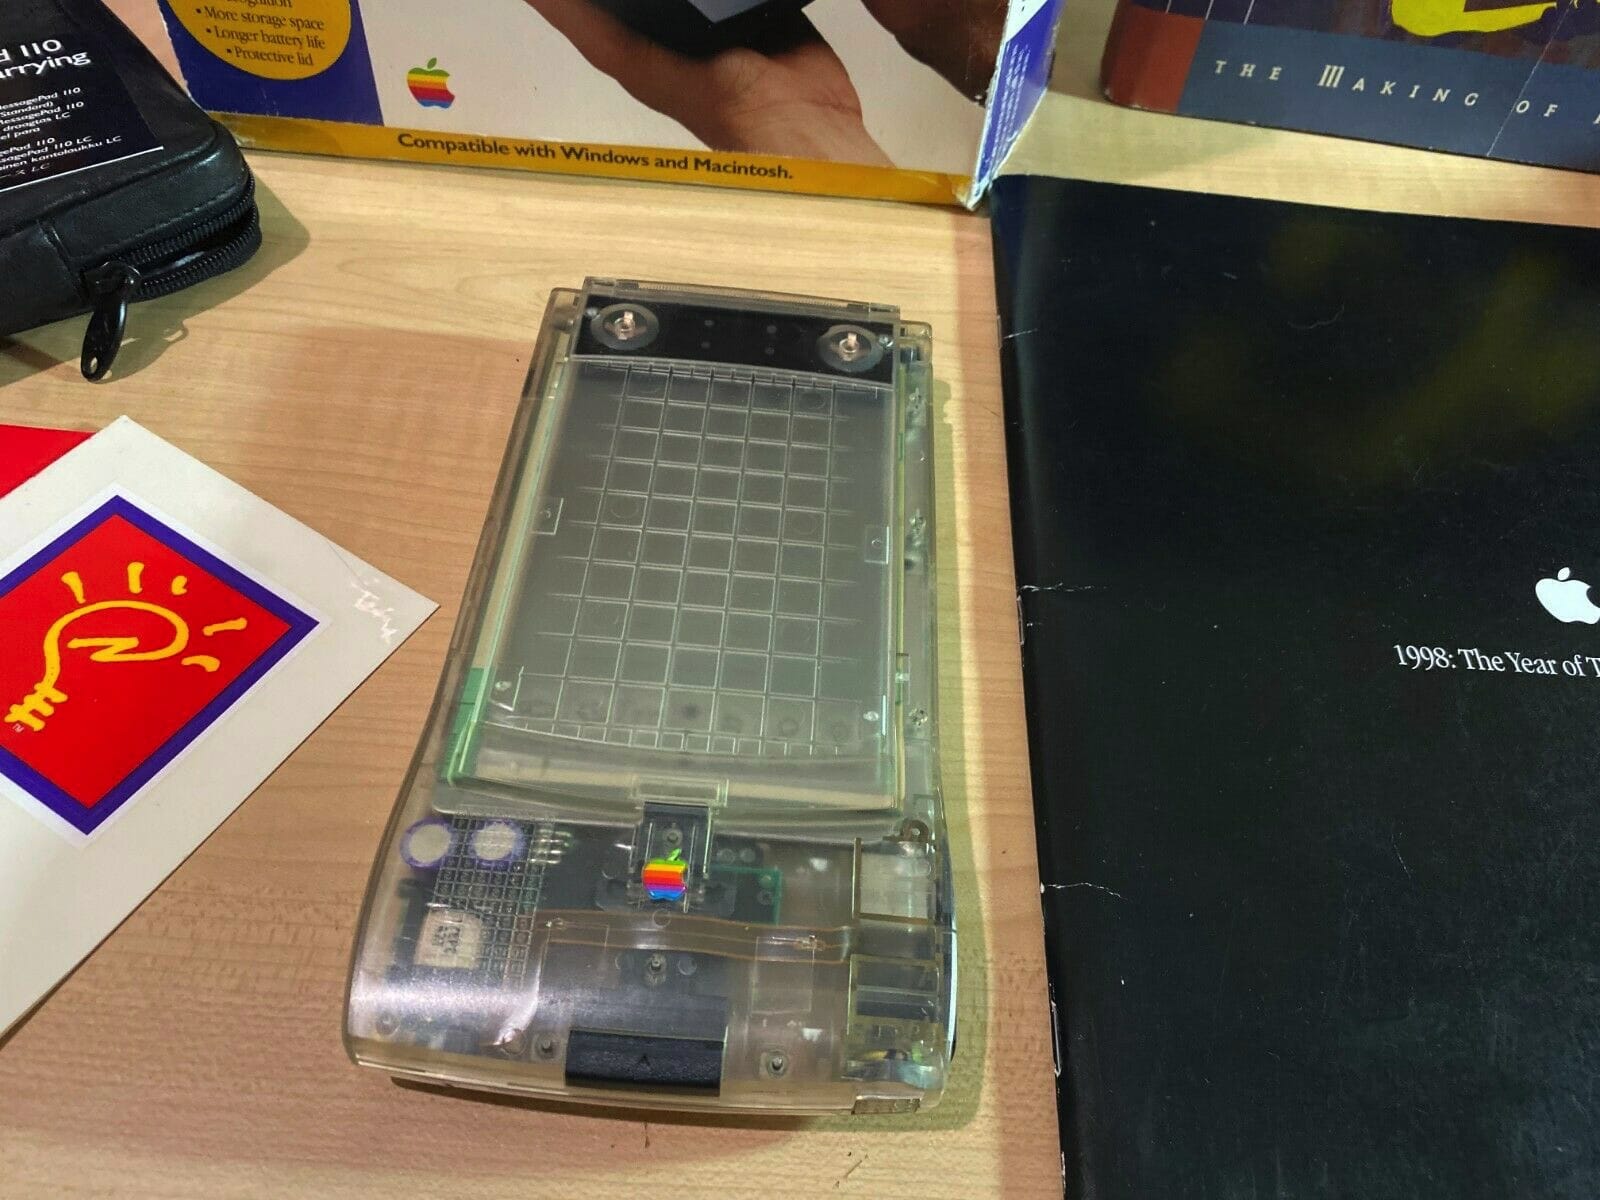 Just $1,050 will bag you a limited edition Newton MessagePad on eBay